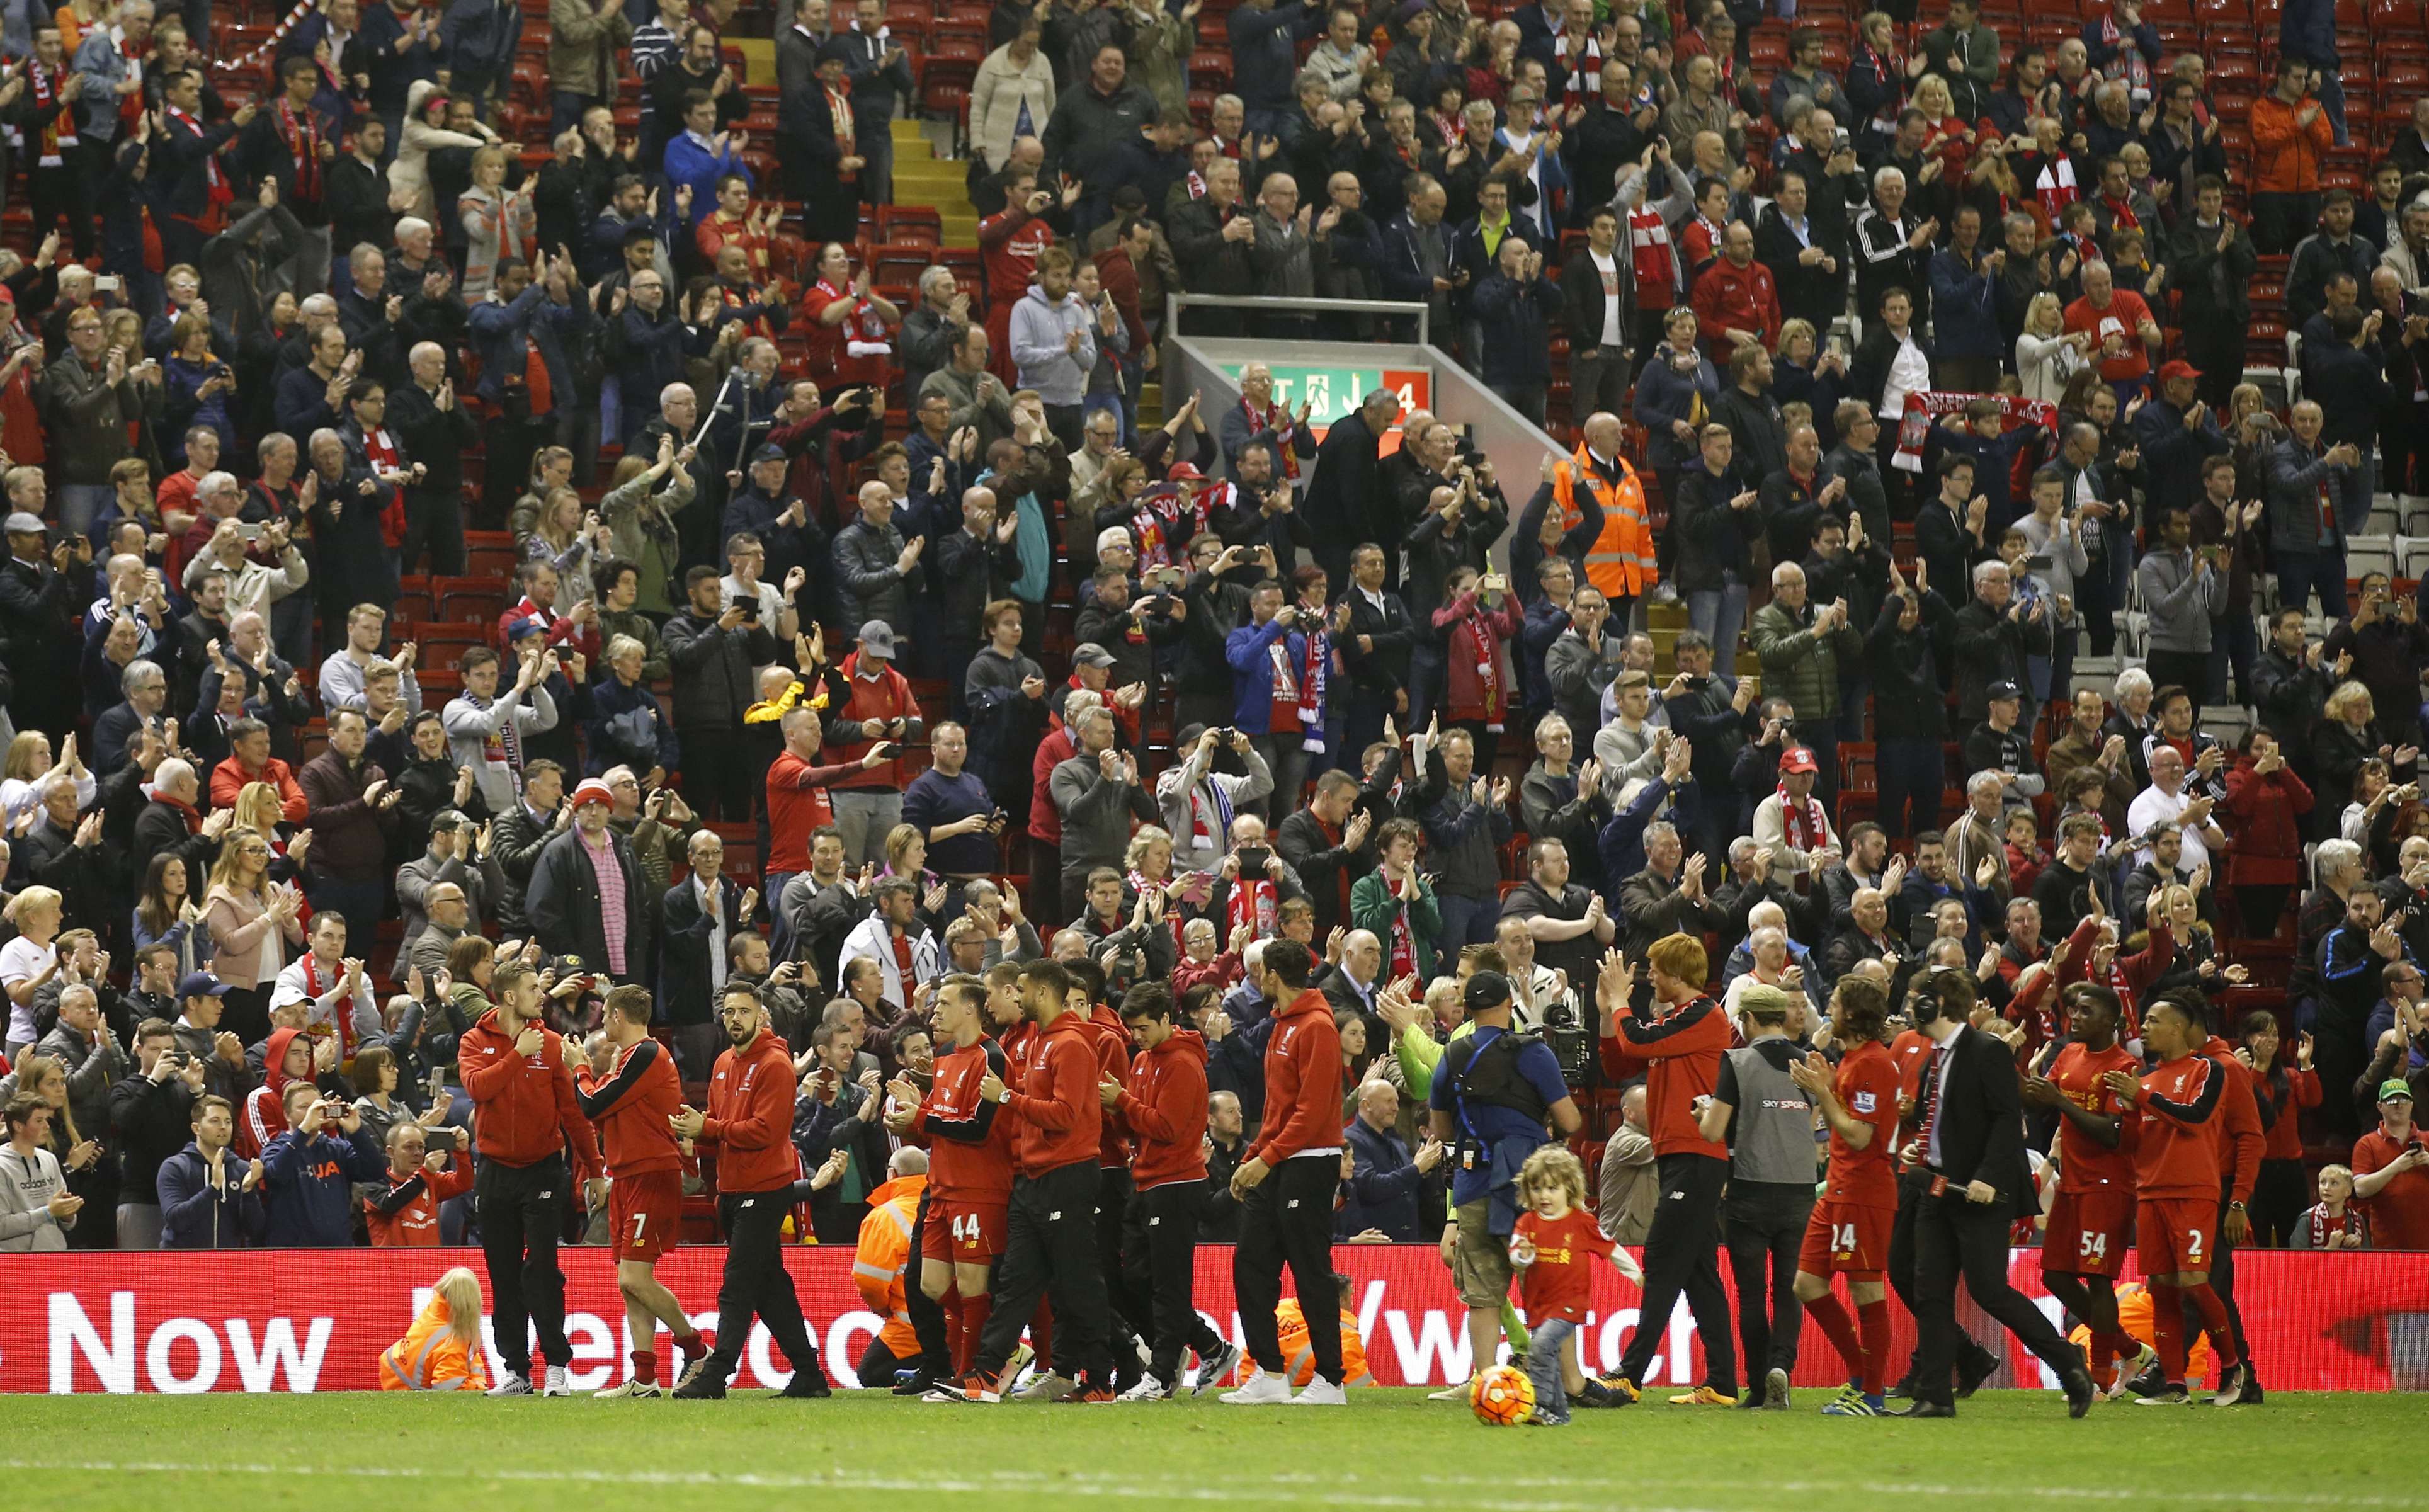 Liverpool secured a draw in their final home game of the season after Christian Benteke’s late equaliser. Photo: Reuters